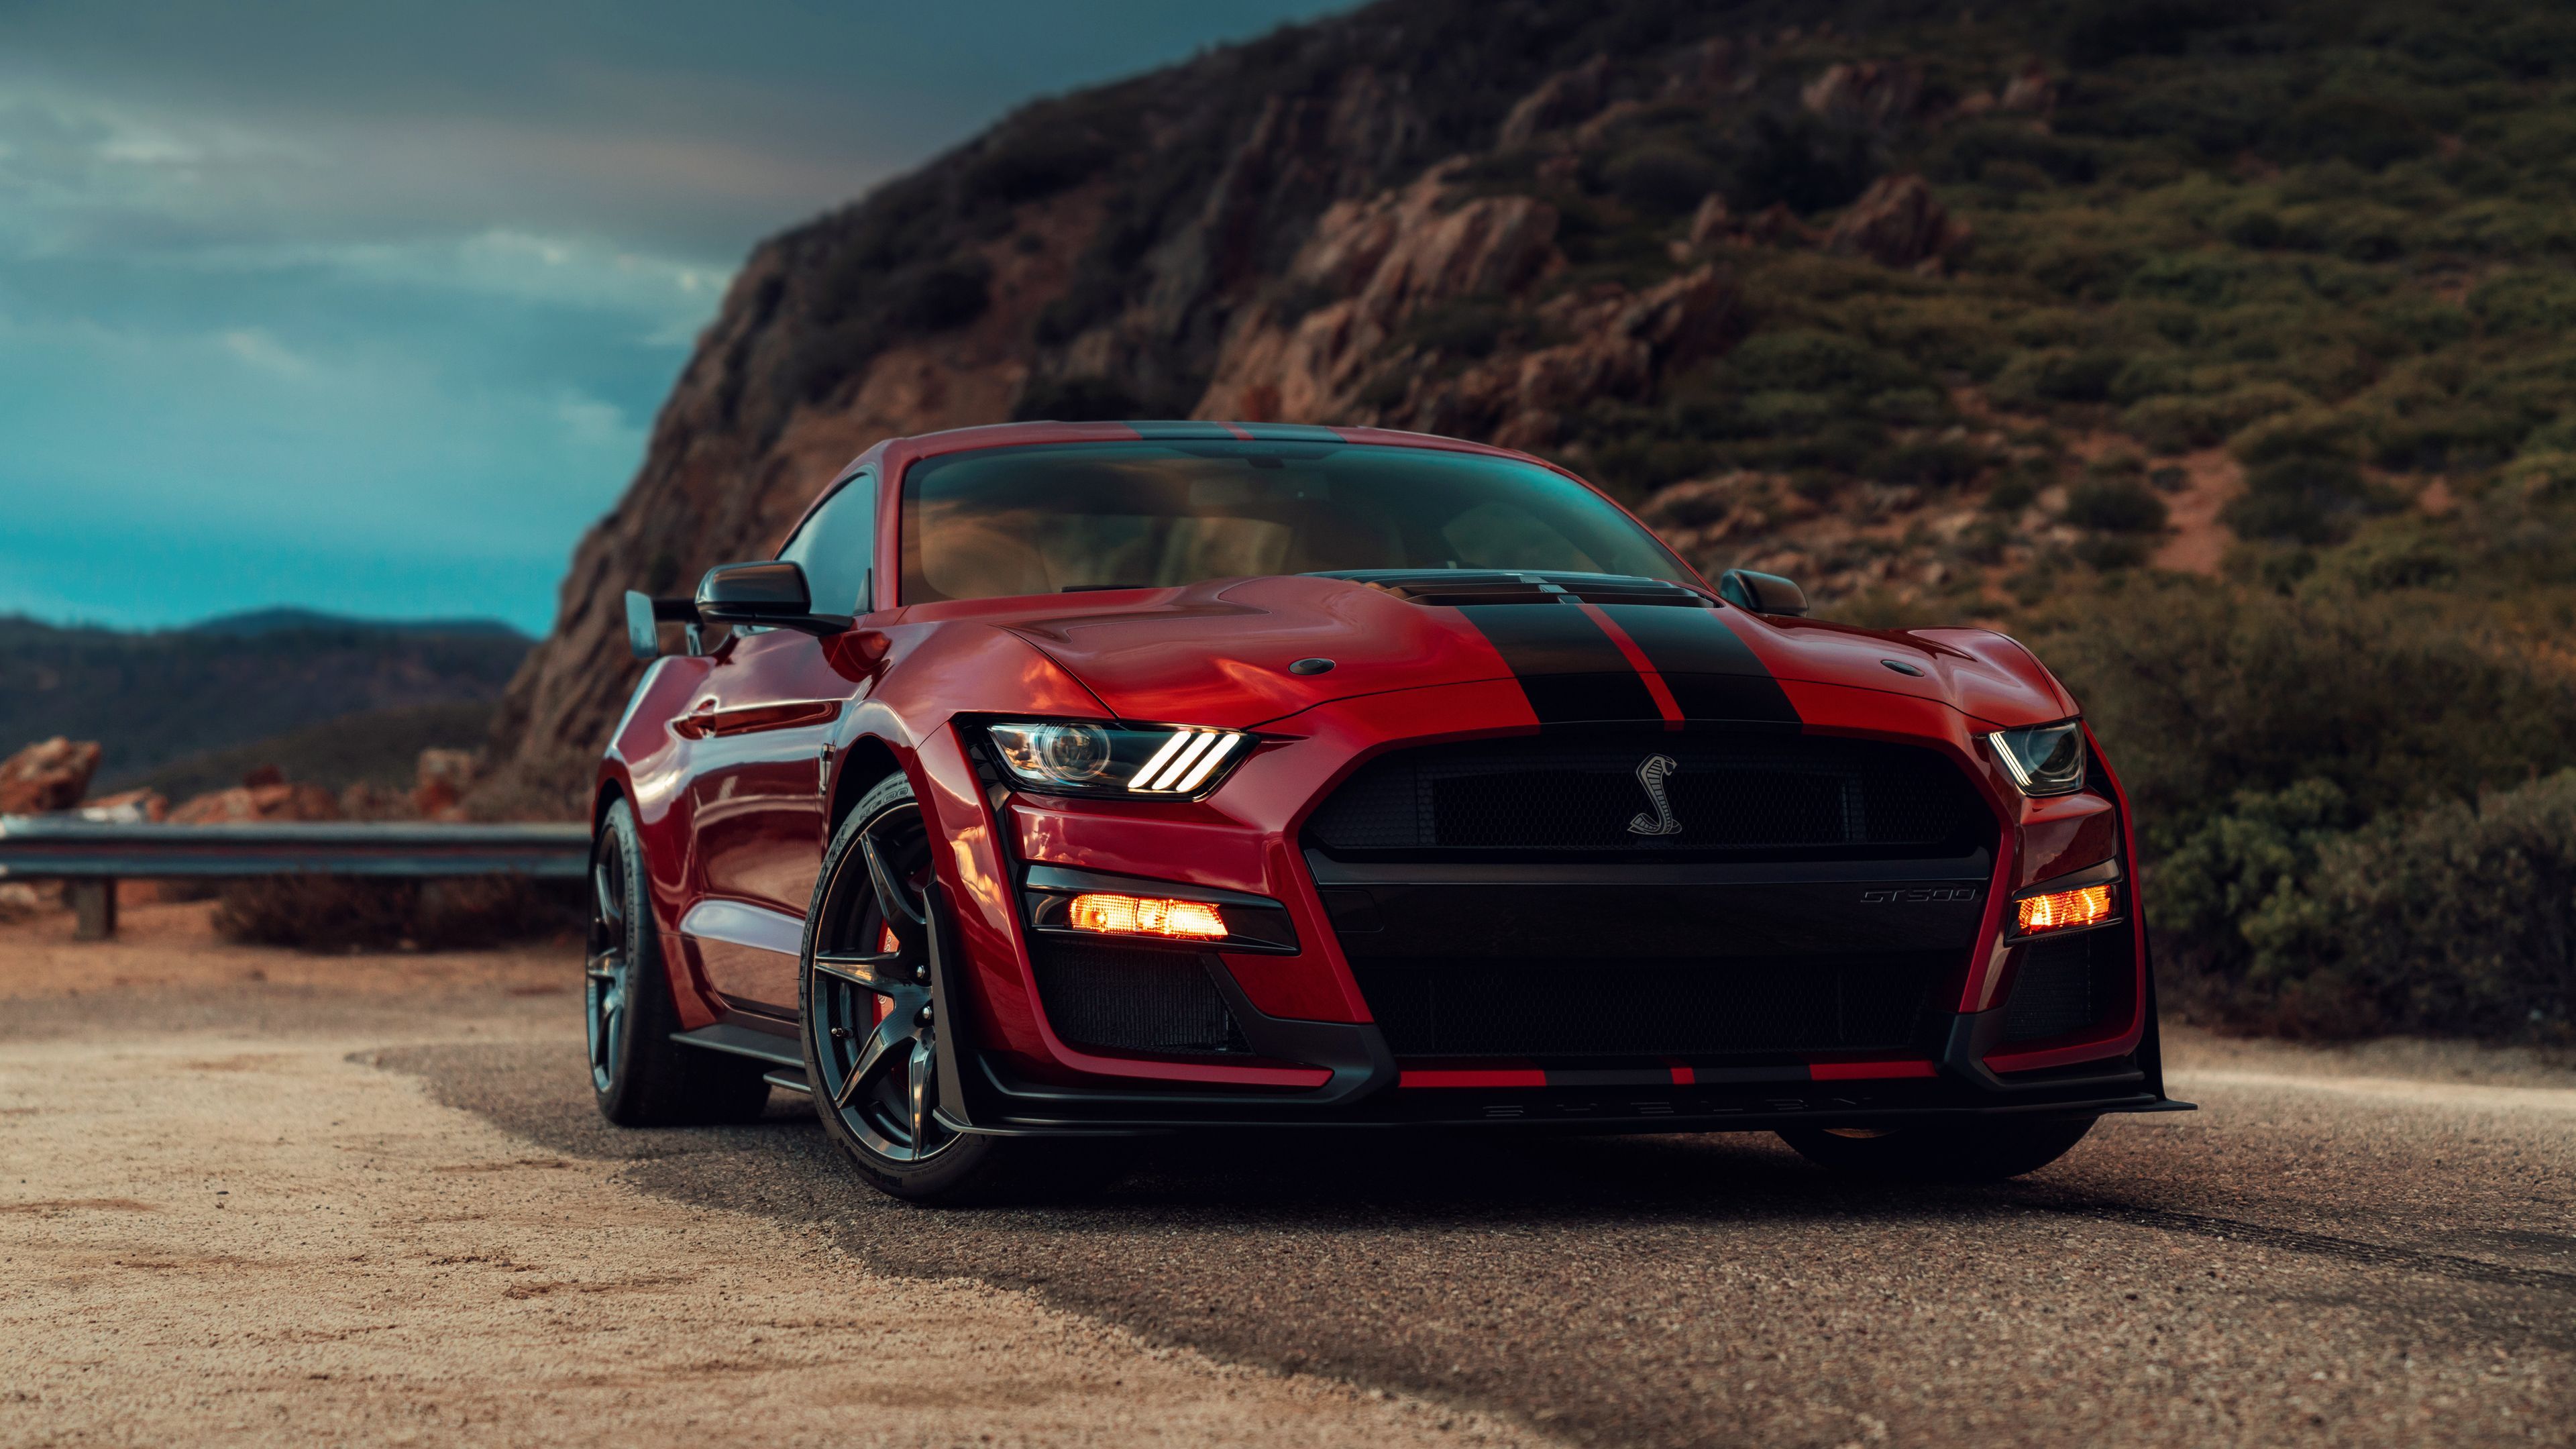 Ford Mustang Shelby GT500 4k Shelby Wallpaper, Hd Wallpaper, Ford Wallpaper, Ford Mustang. Shelby Mustang Gt Ford Mustang Shelby Gt Mustang Shelby